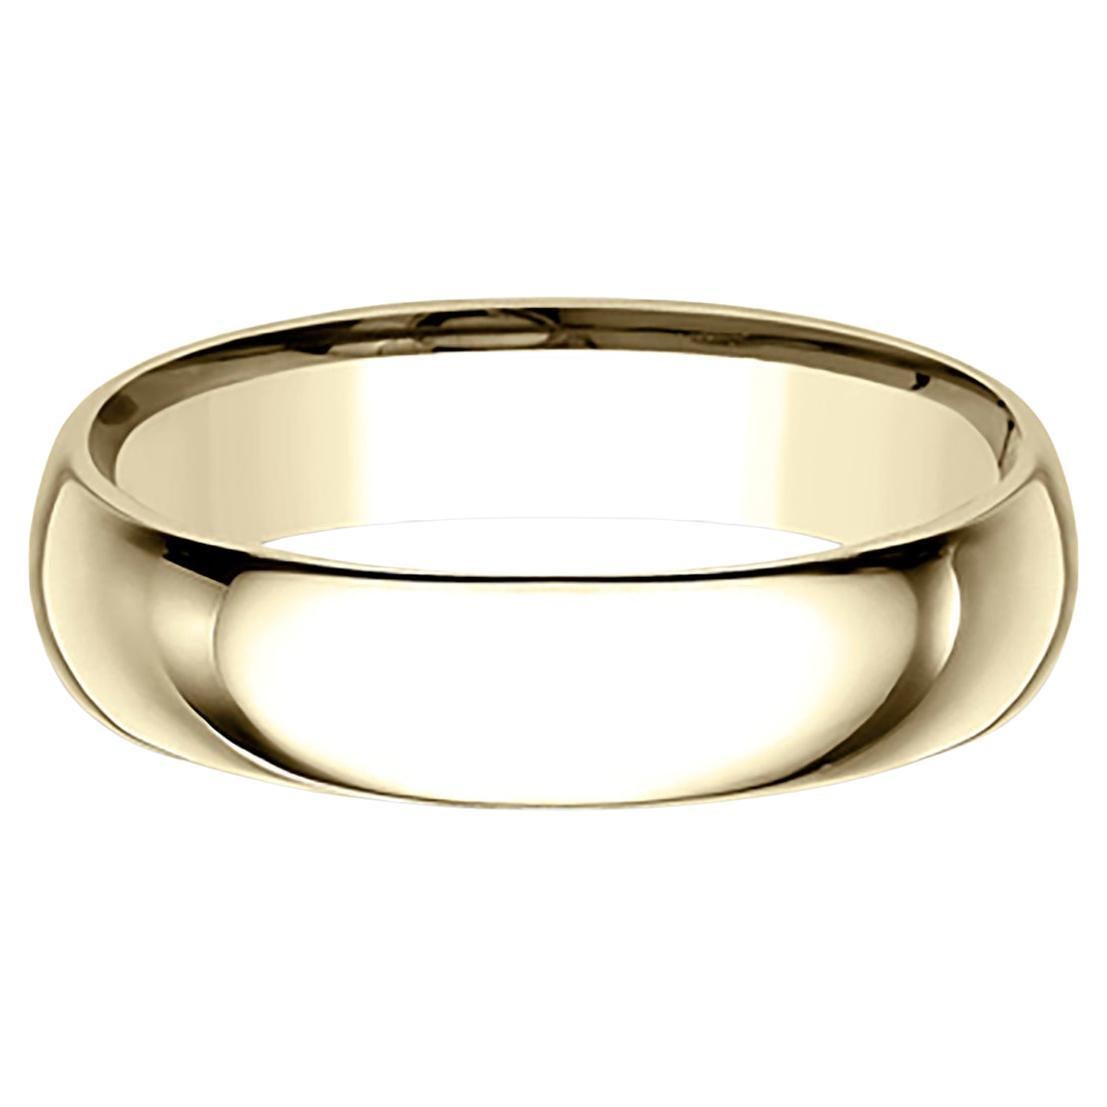 Benchmark Classic Comfort Fit Wedding Band in 14K Yellow Gold, Width 5mm For Sale